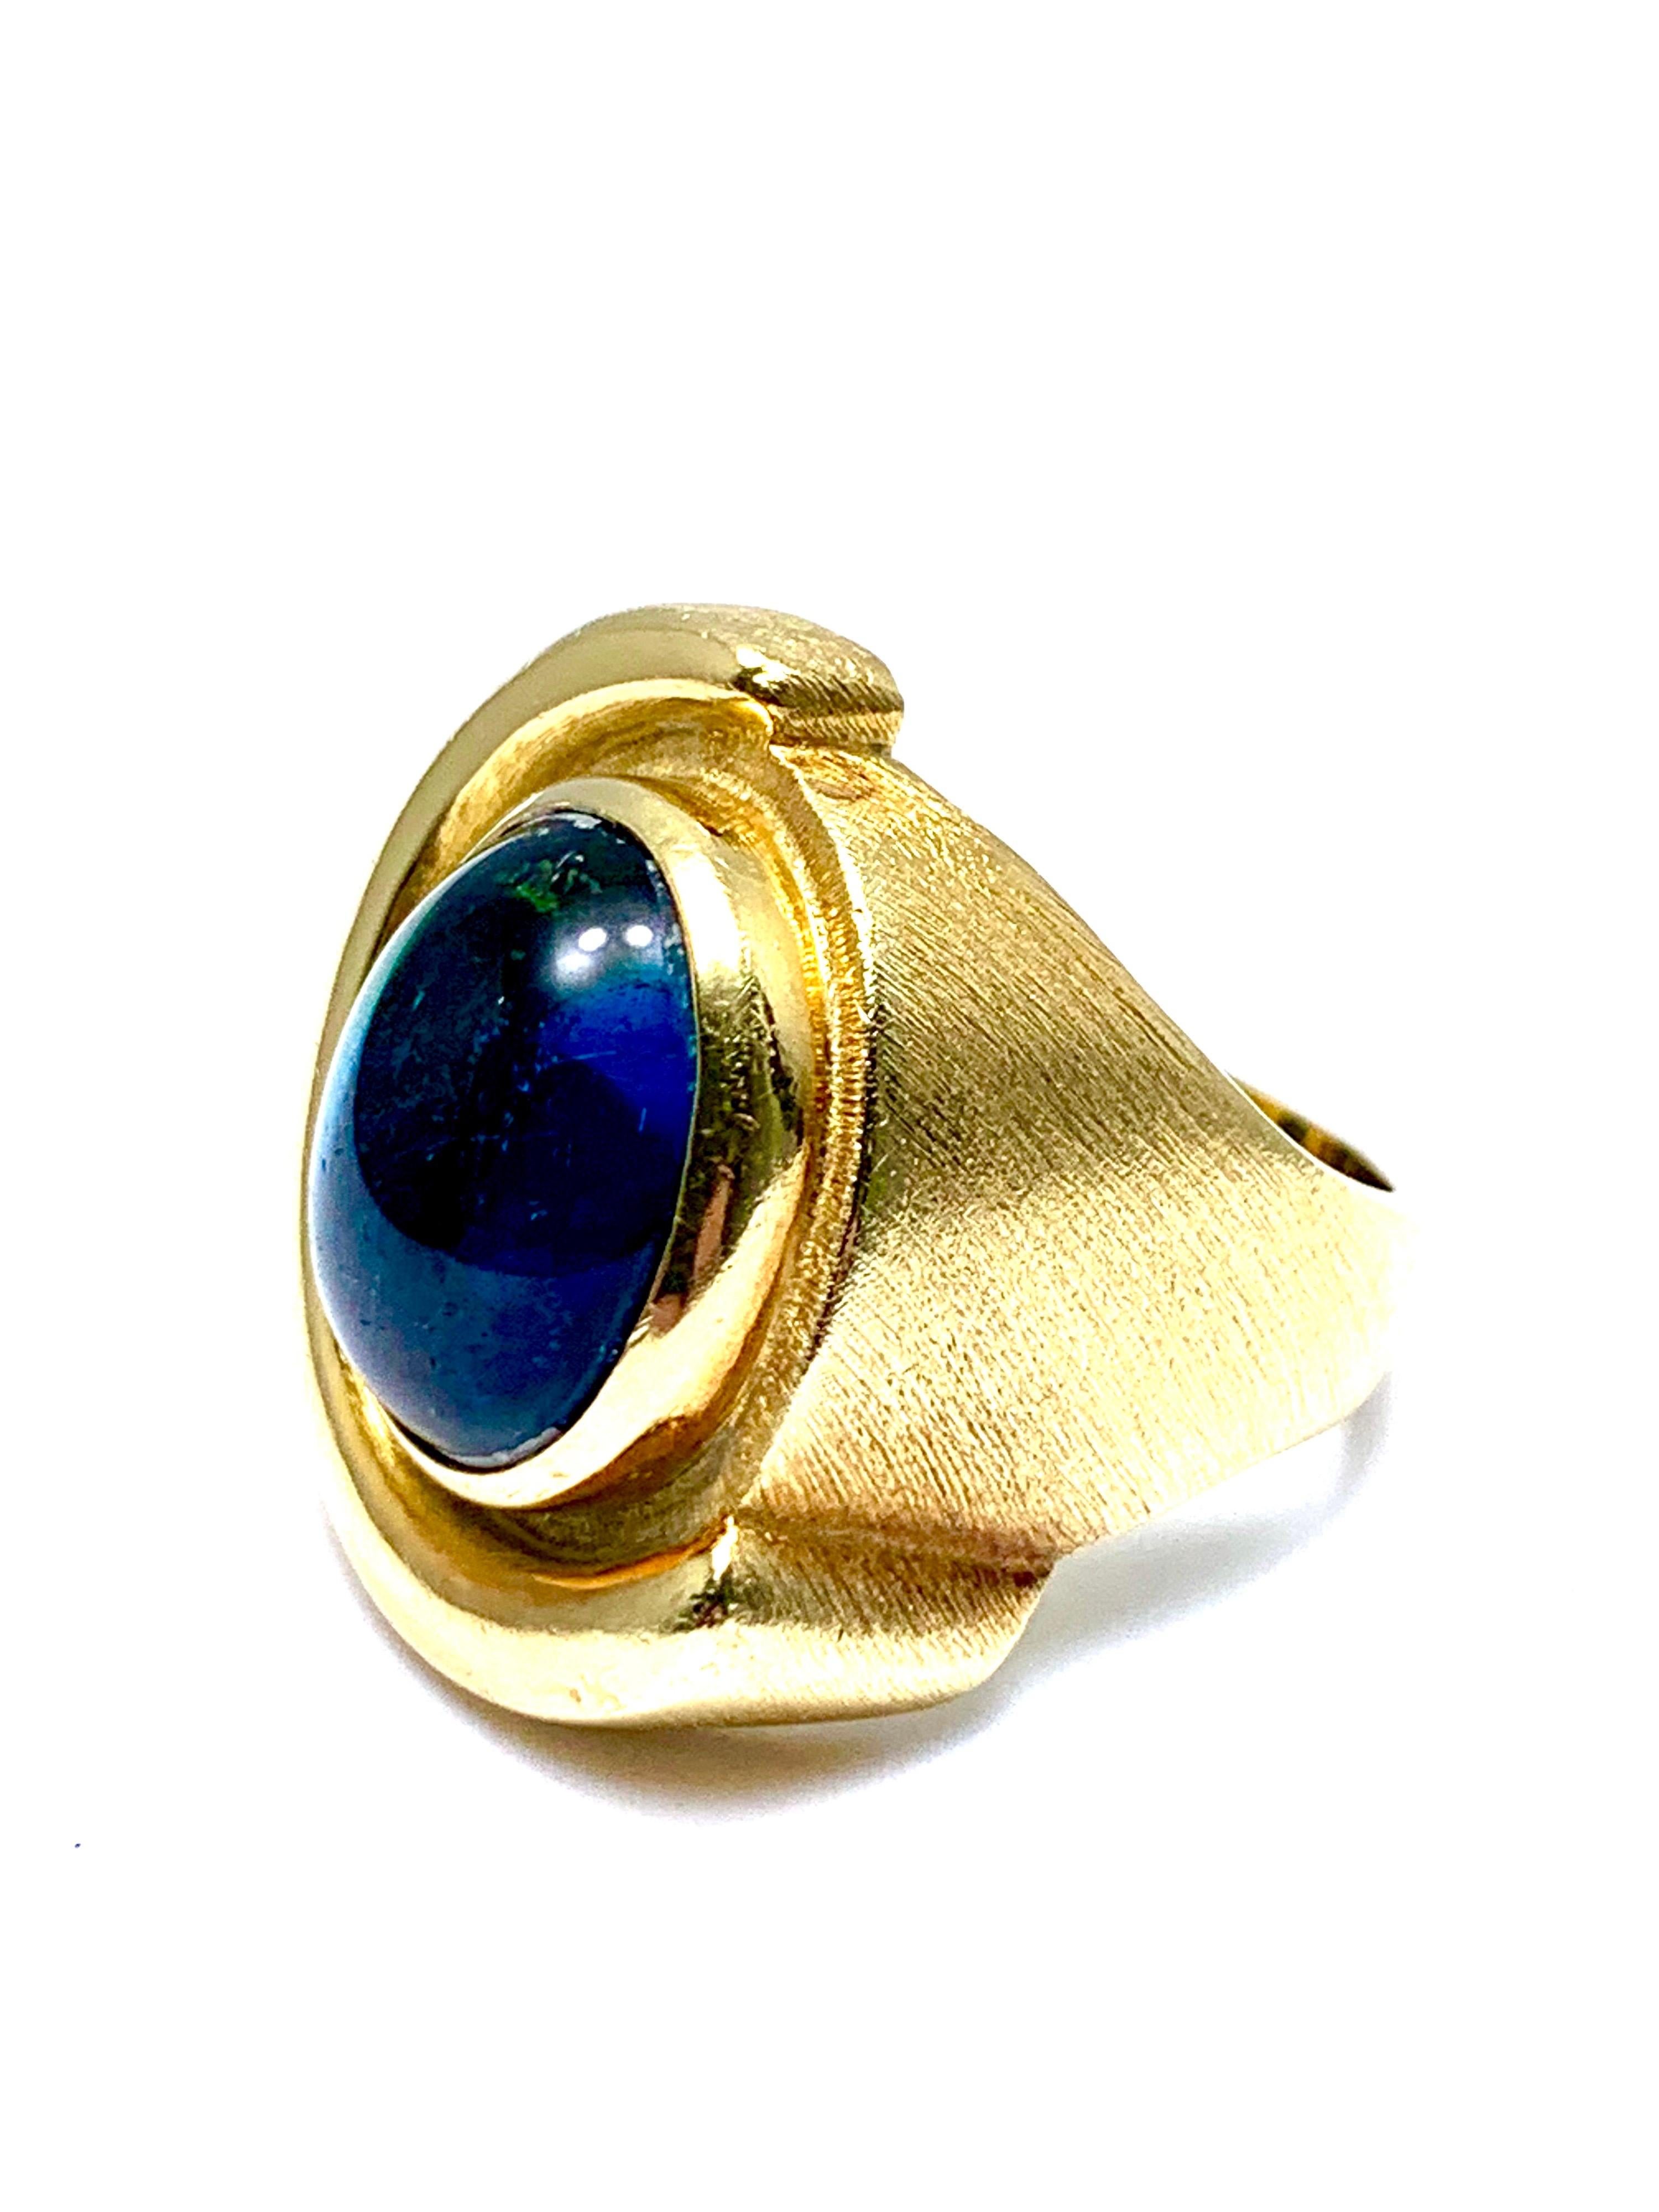 Bruno Guidi 6.43 Carat Cabochon Indicolite Tourmaline 18 Karat Yellow Gold Ring In Excellent Condition For Sale In Chevy Chase, MD